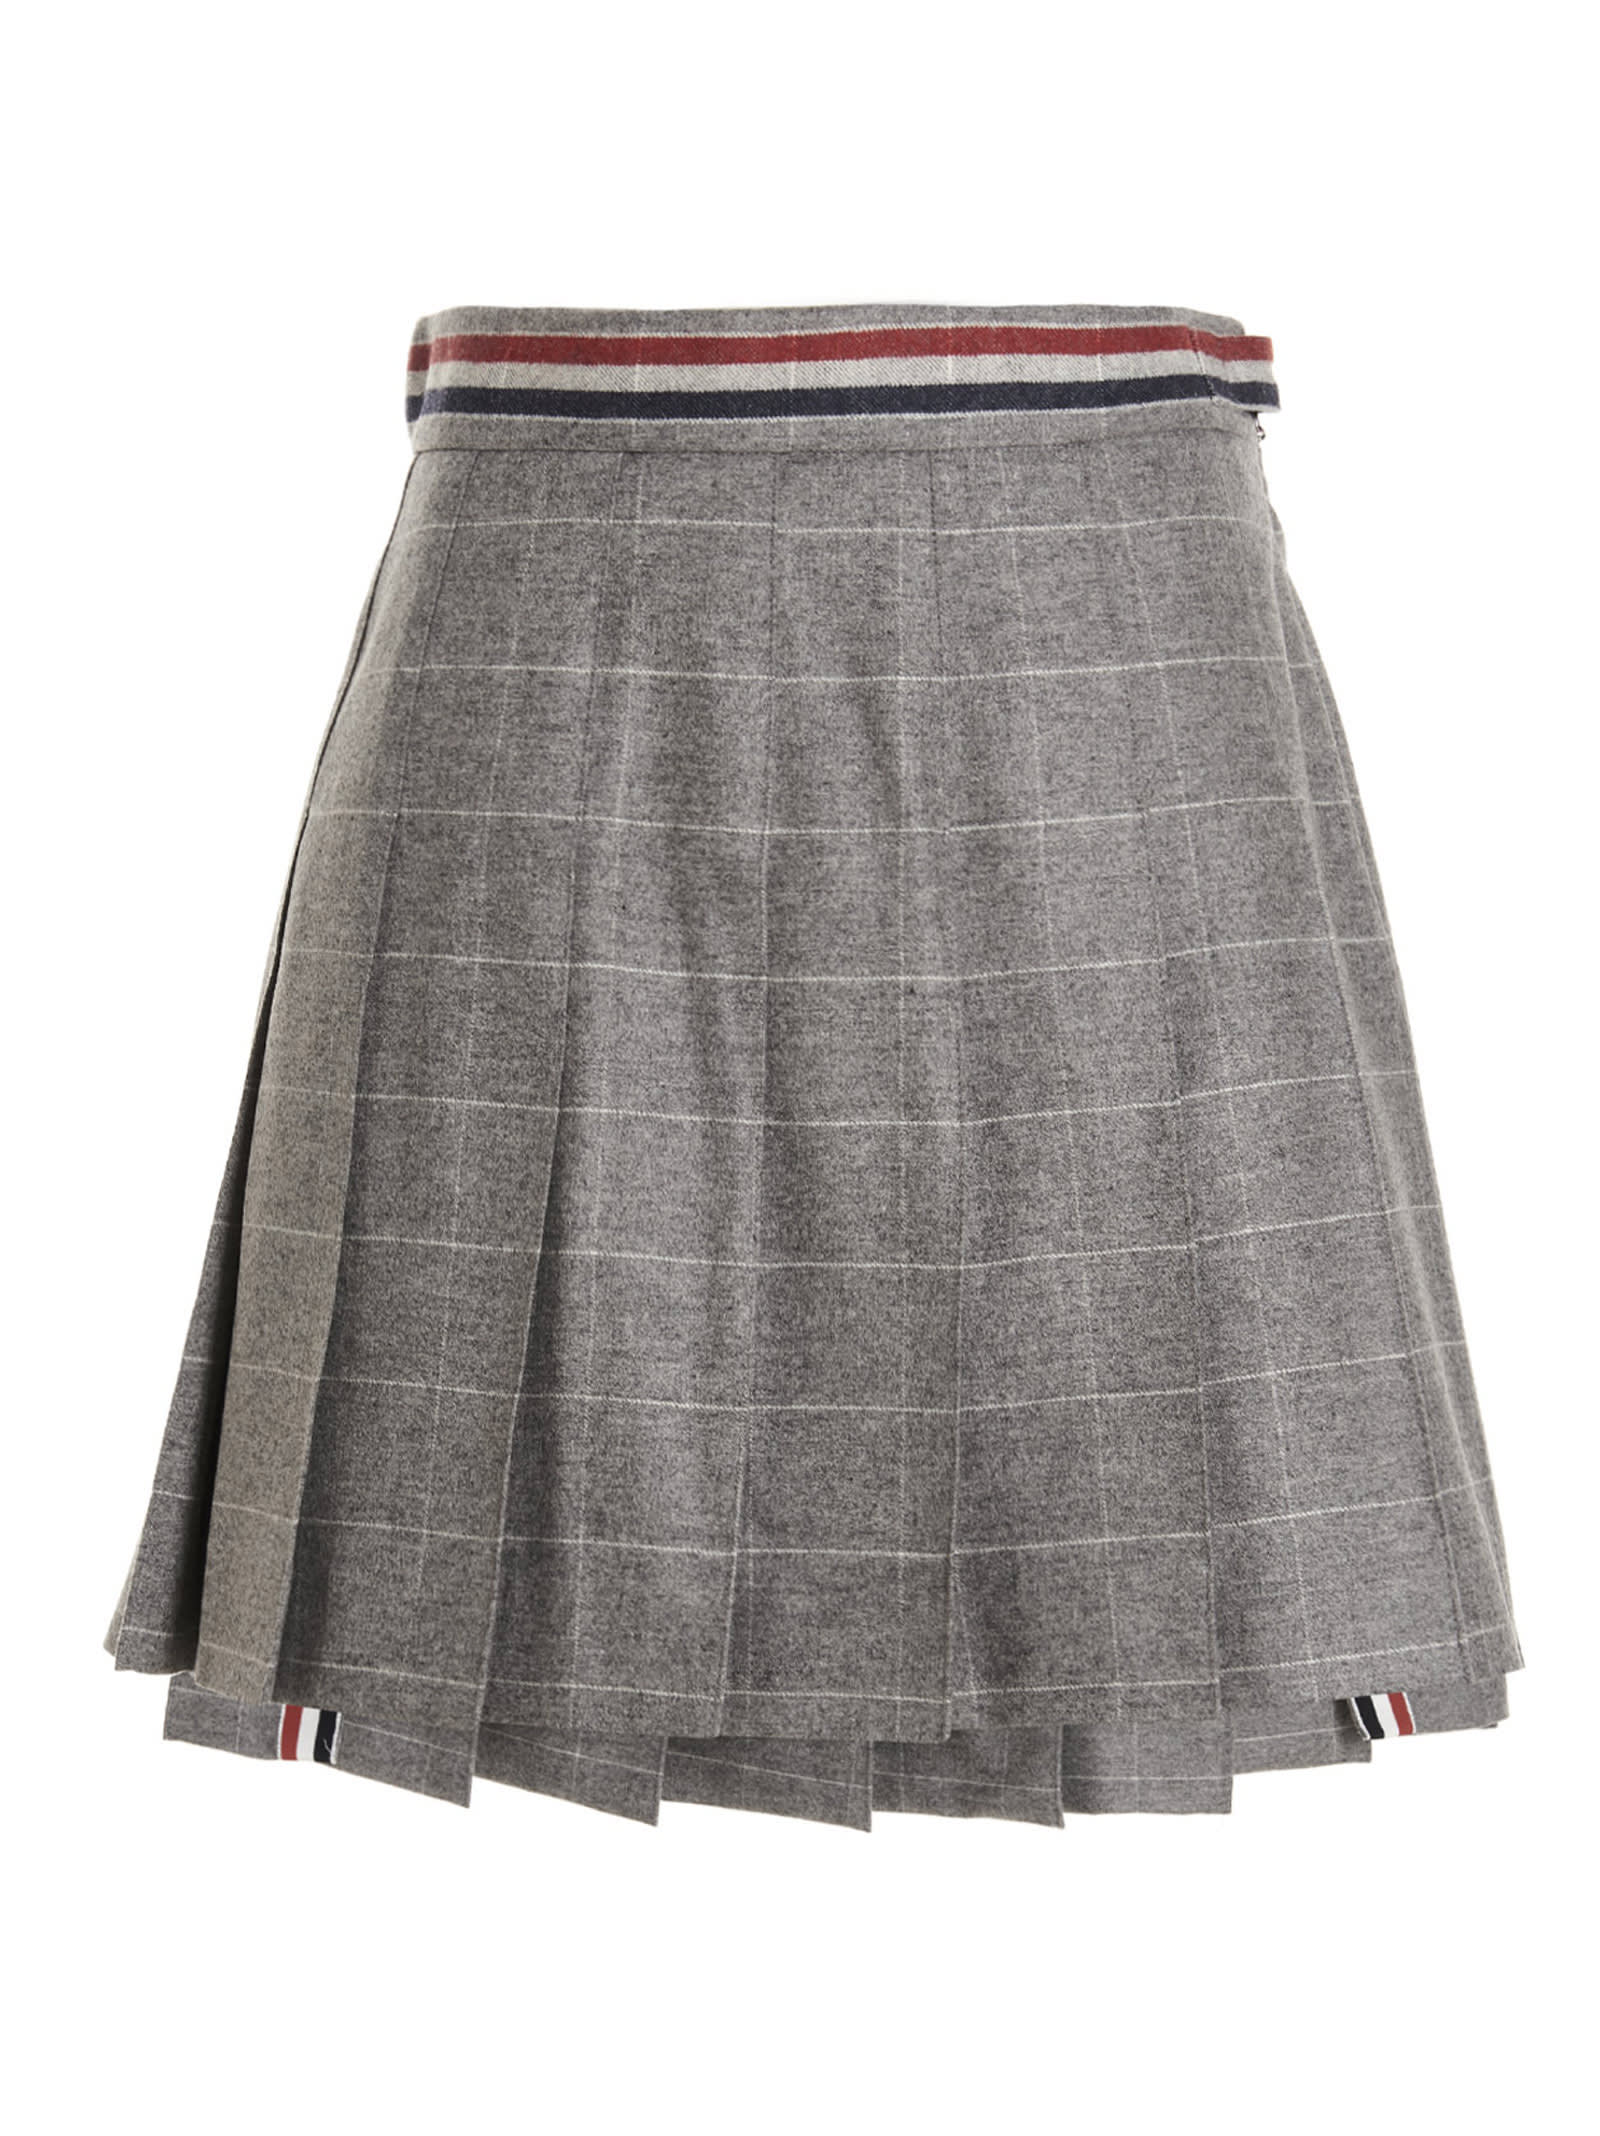 Thom Browne Check Pleated Skirt